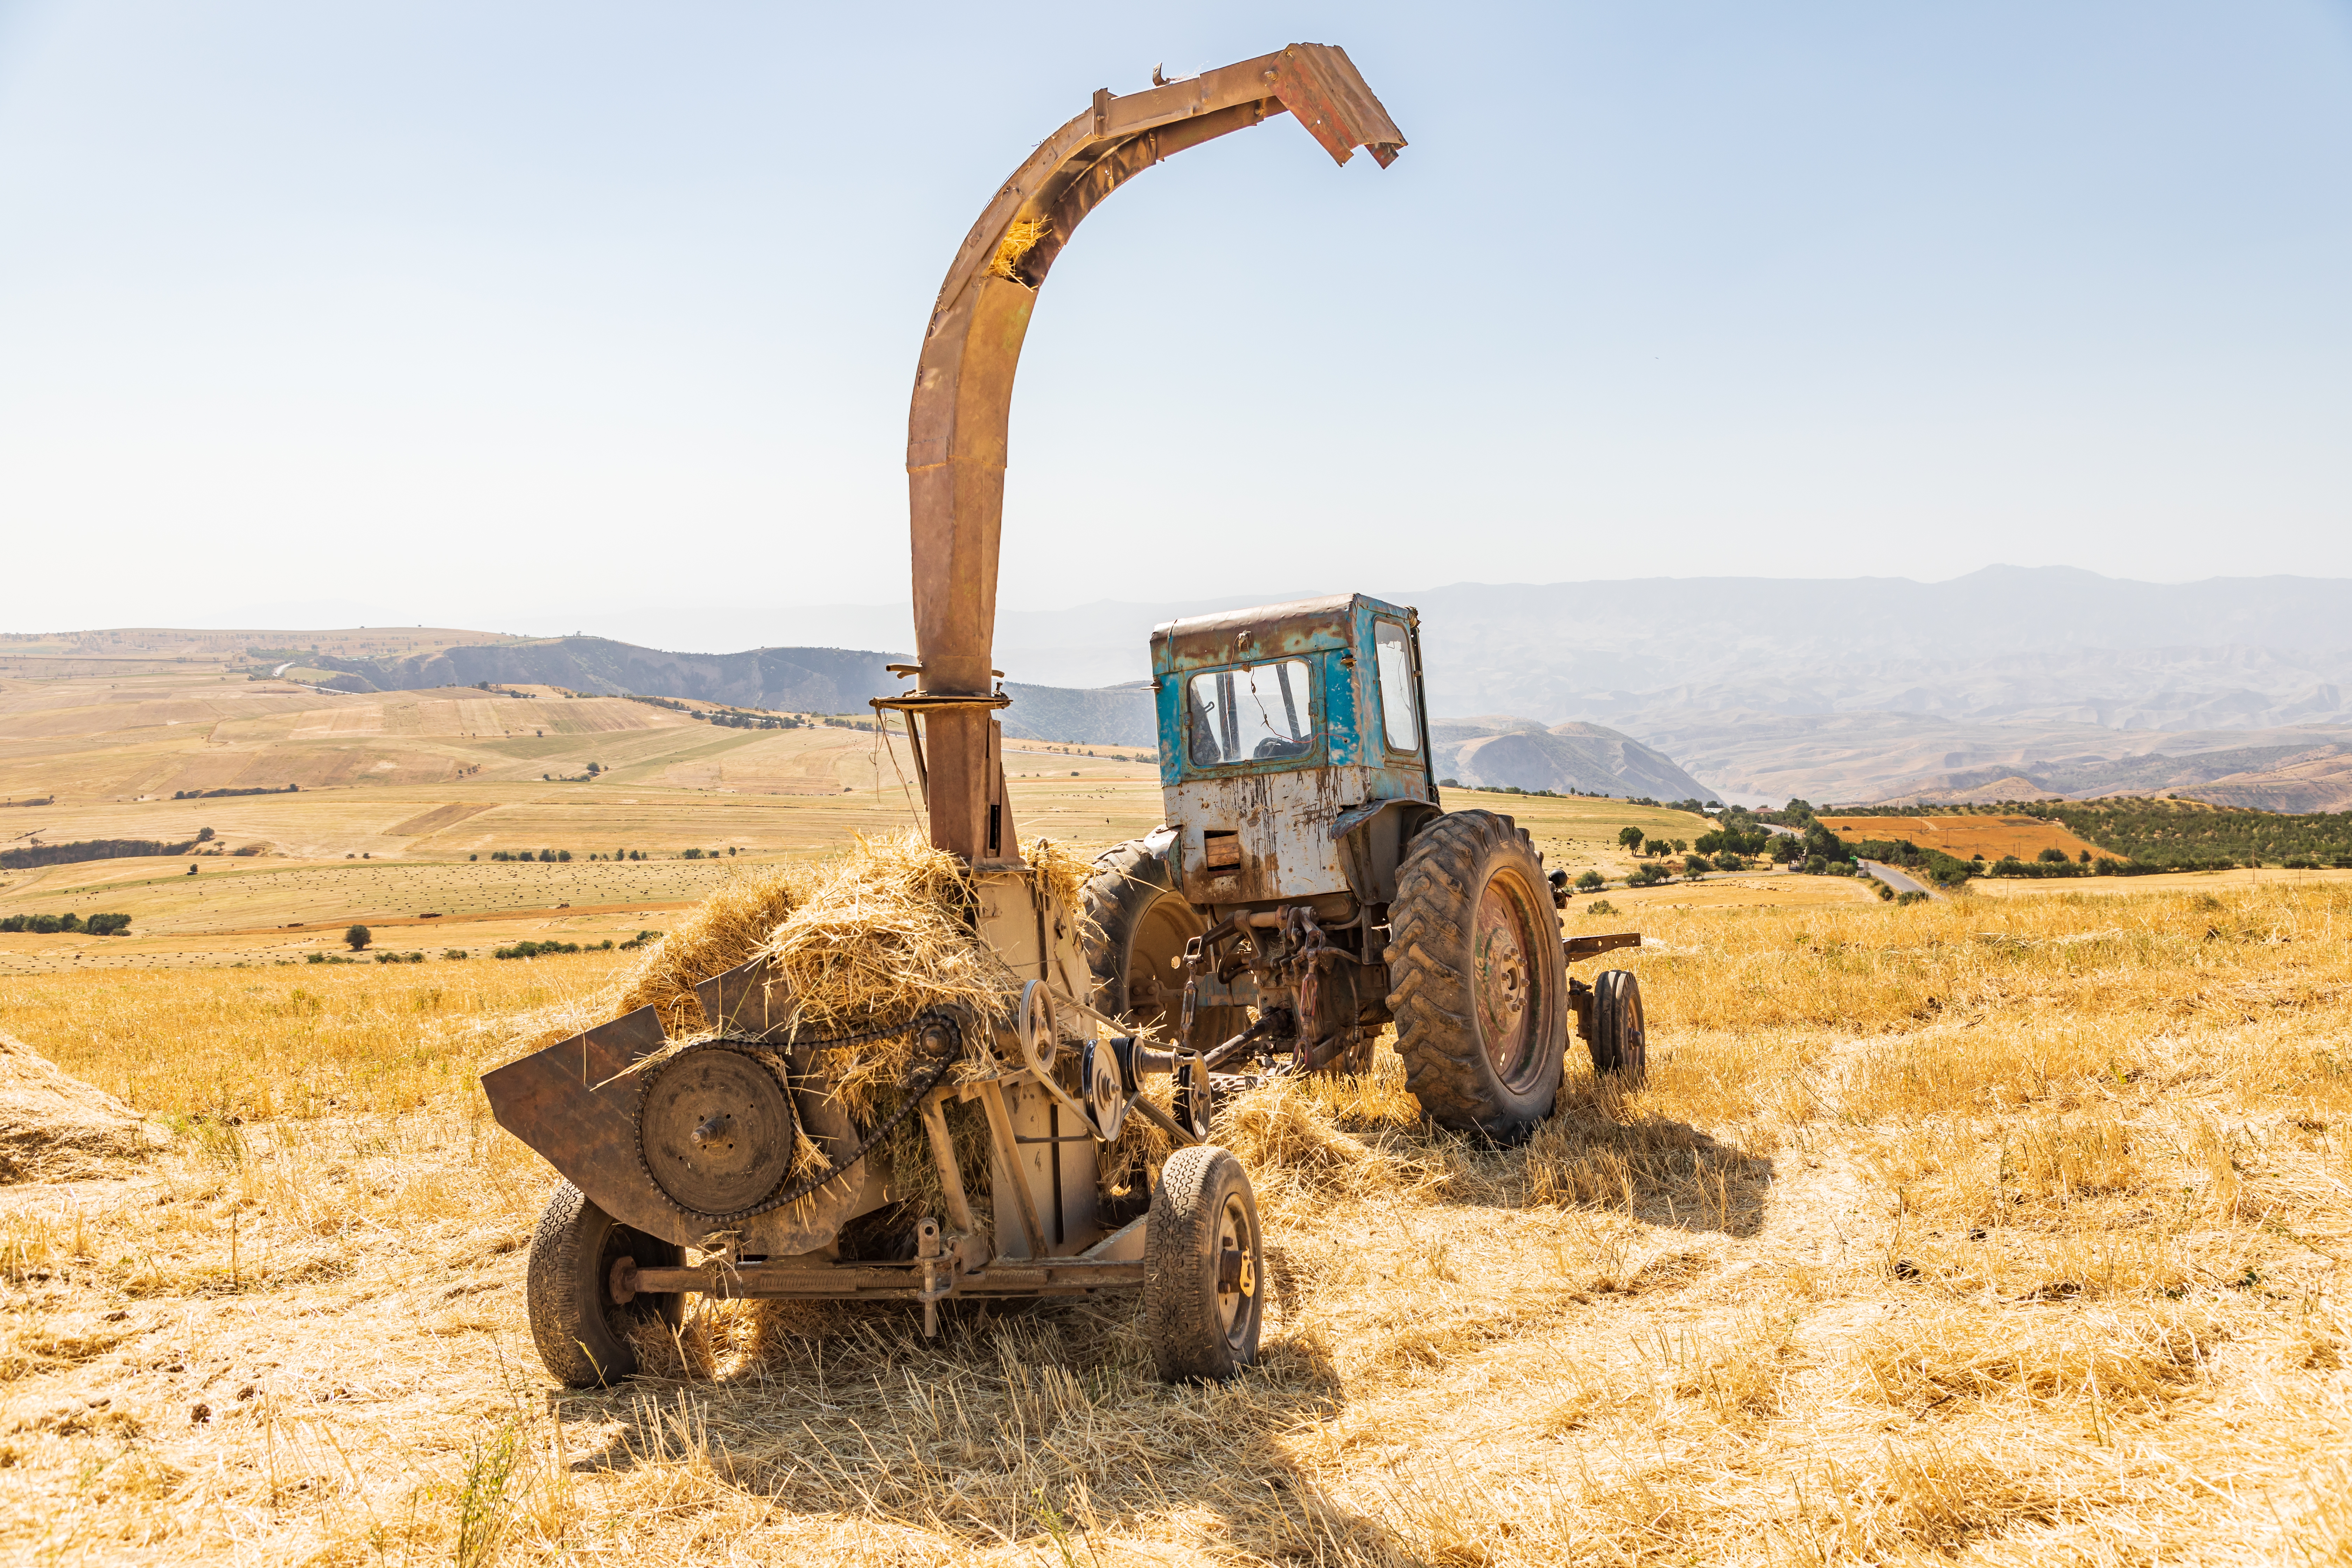 A visit to the area now will show modern farming technologies © Emily Marie Wilson / Shutterstock